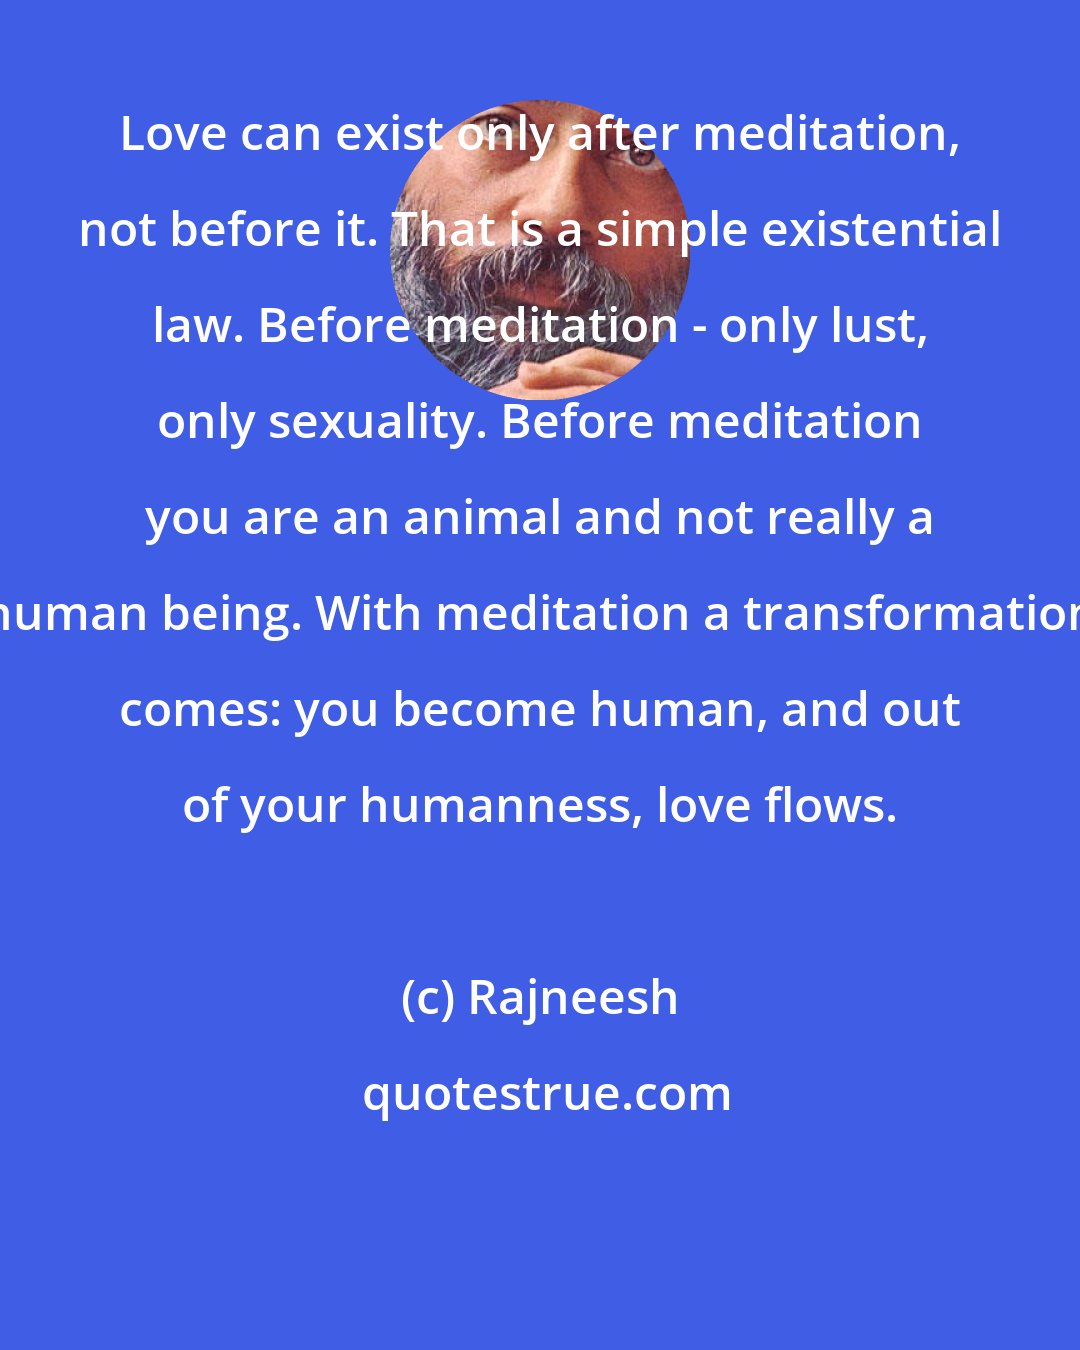 Rajneesh: Love can exist only after meditation, not before it. That is a simple existential law. Before meditation - only lust, only sexuality. Before meditation you are an animal and not really a human being. With meditation a transformation comes: you become human, and out of your humanness, love flows.